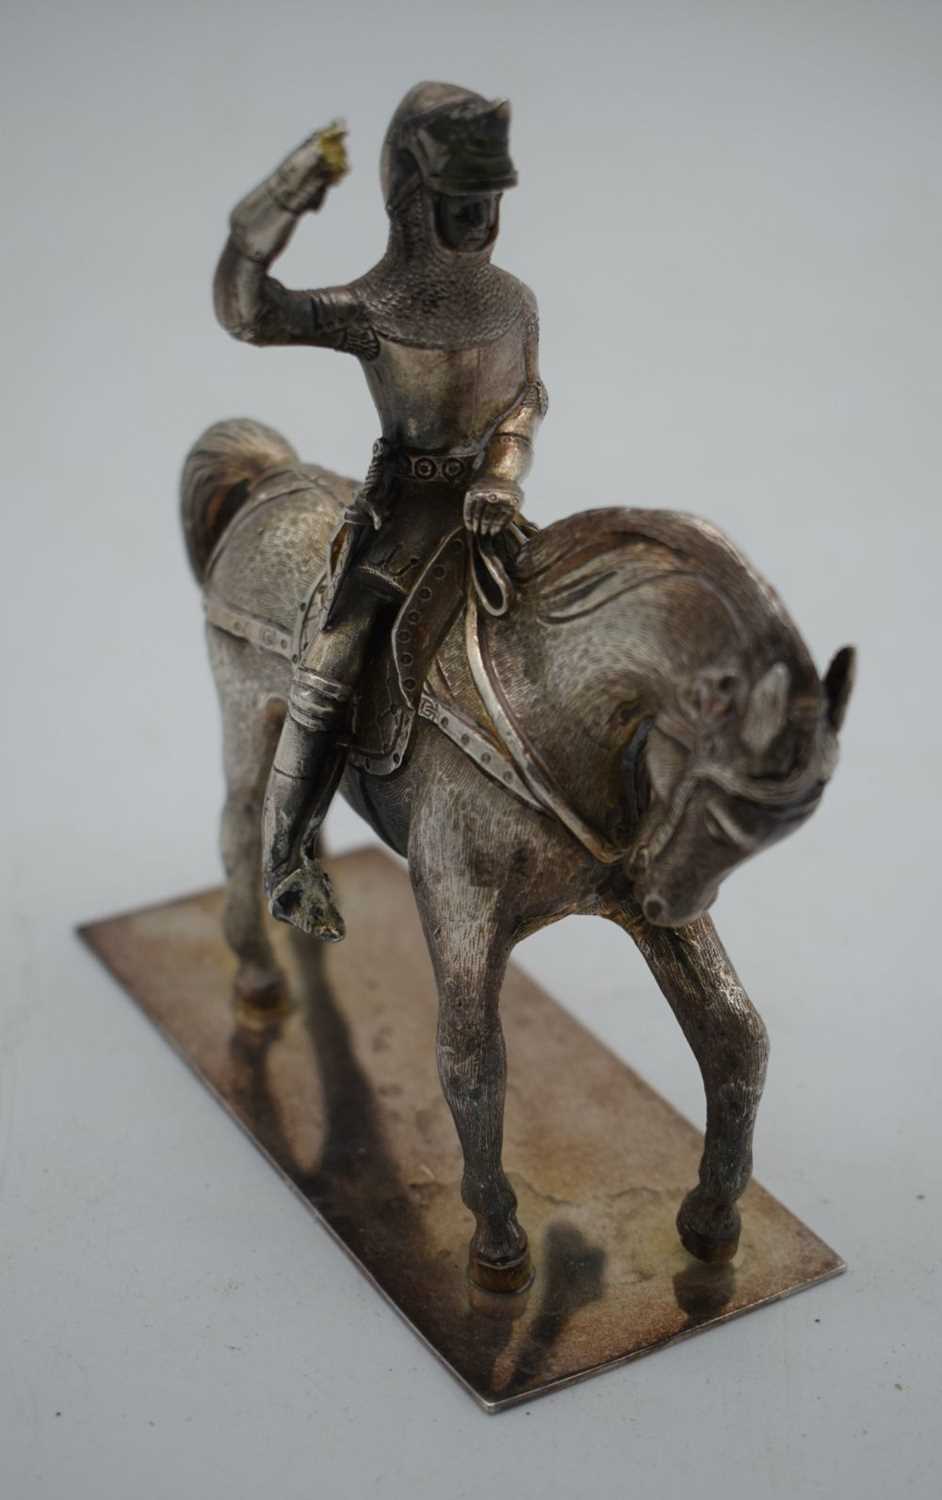 A FINE 19TH CENTURY ENGLISH WHITE METAL FIGURE OF A SOLDIER ON HORSEBACK. 707 grams. 12.5 cm x - Image 2 of 4